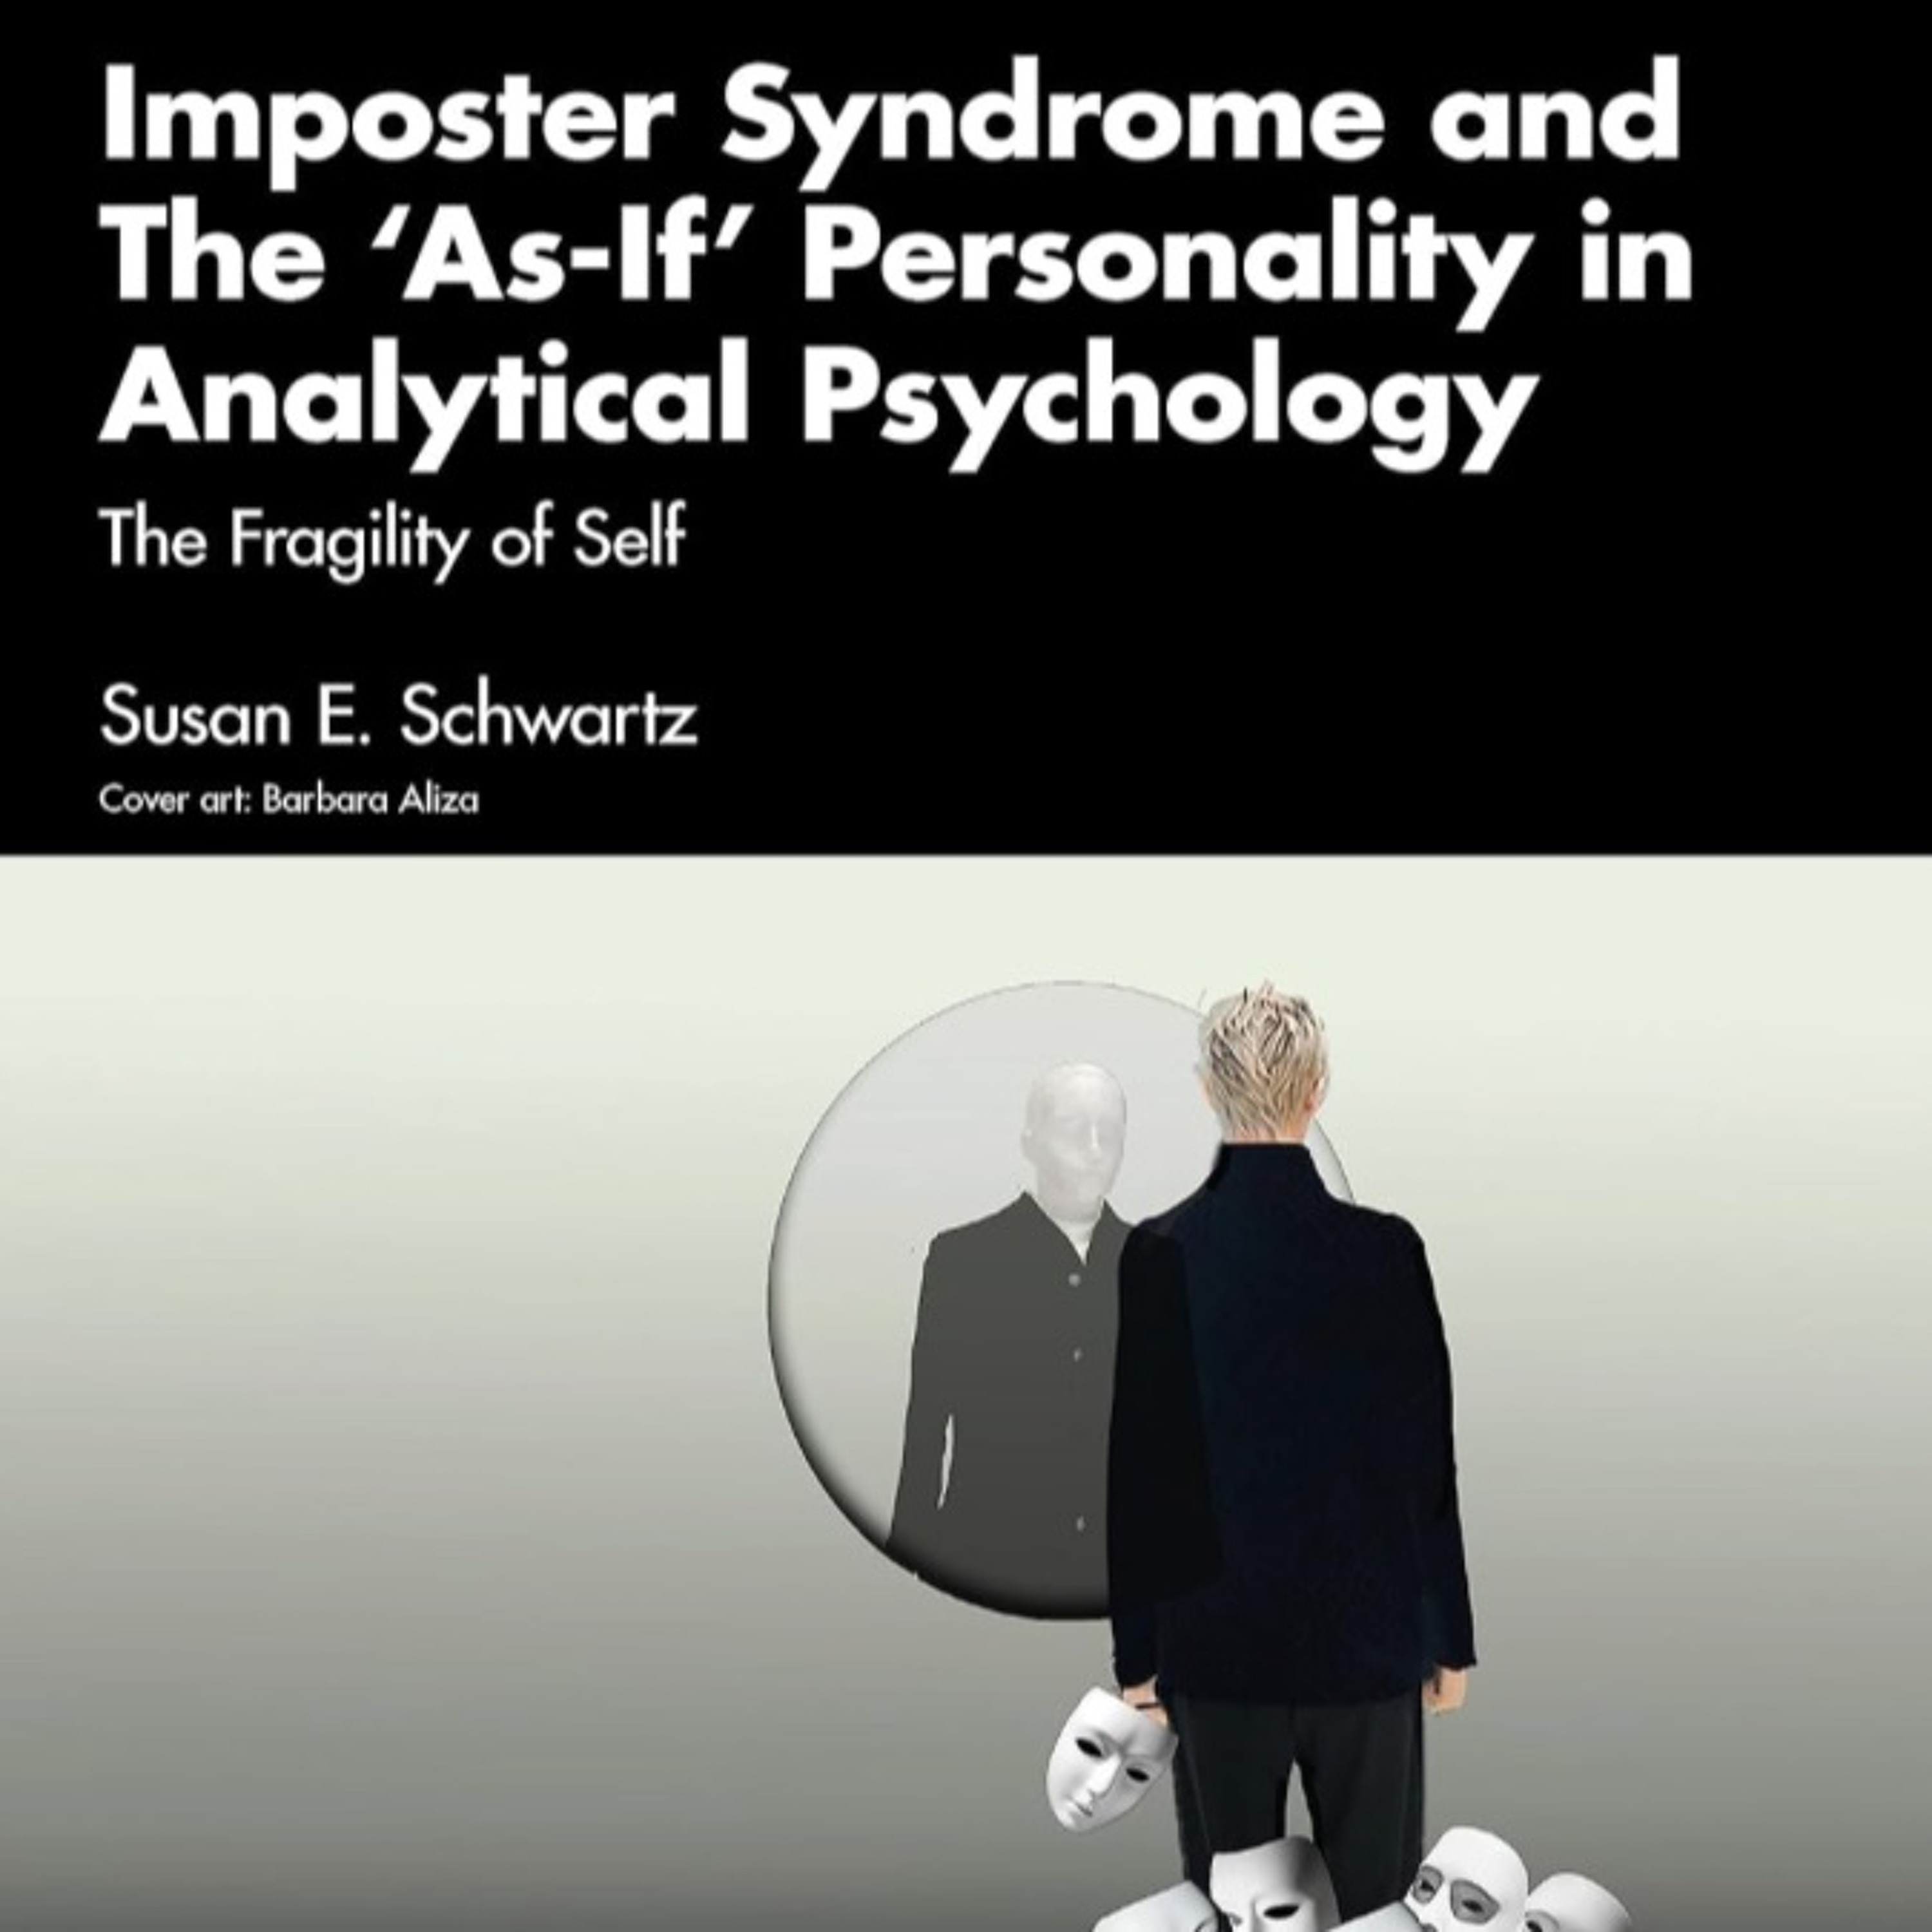 RU278: DR SUSAN SCHWARTZ ON IMPOSTER SYNDROME AND THE ‘AS-IF’ PERSONALITY IN ANALYTICAL PSYCHOLOGY